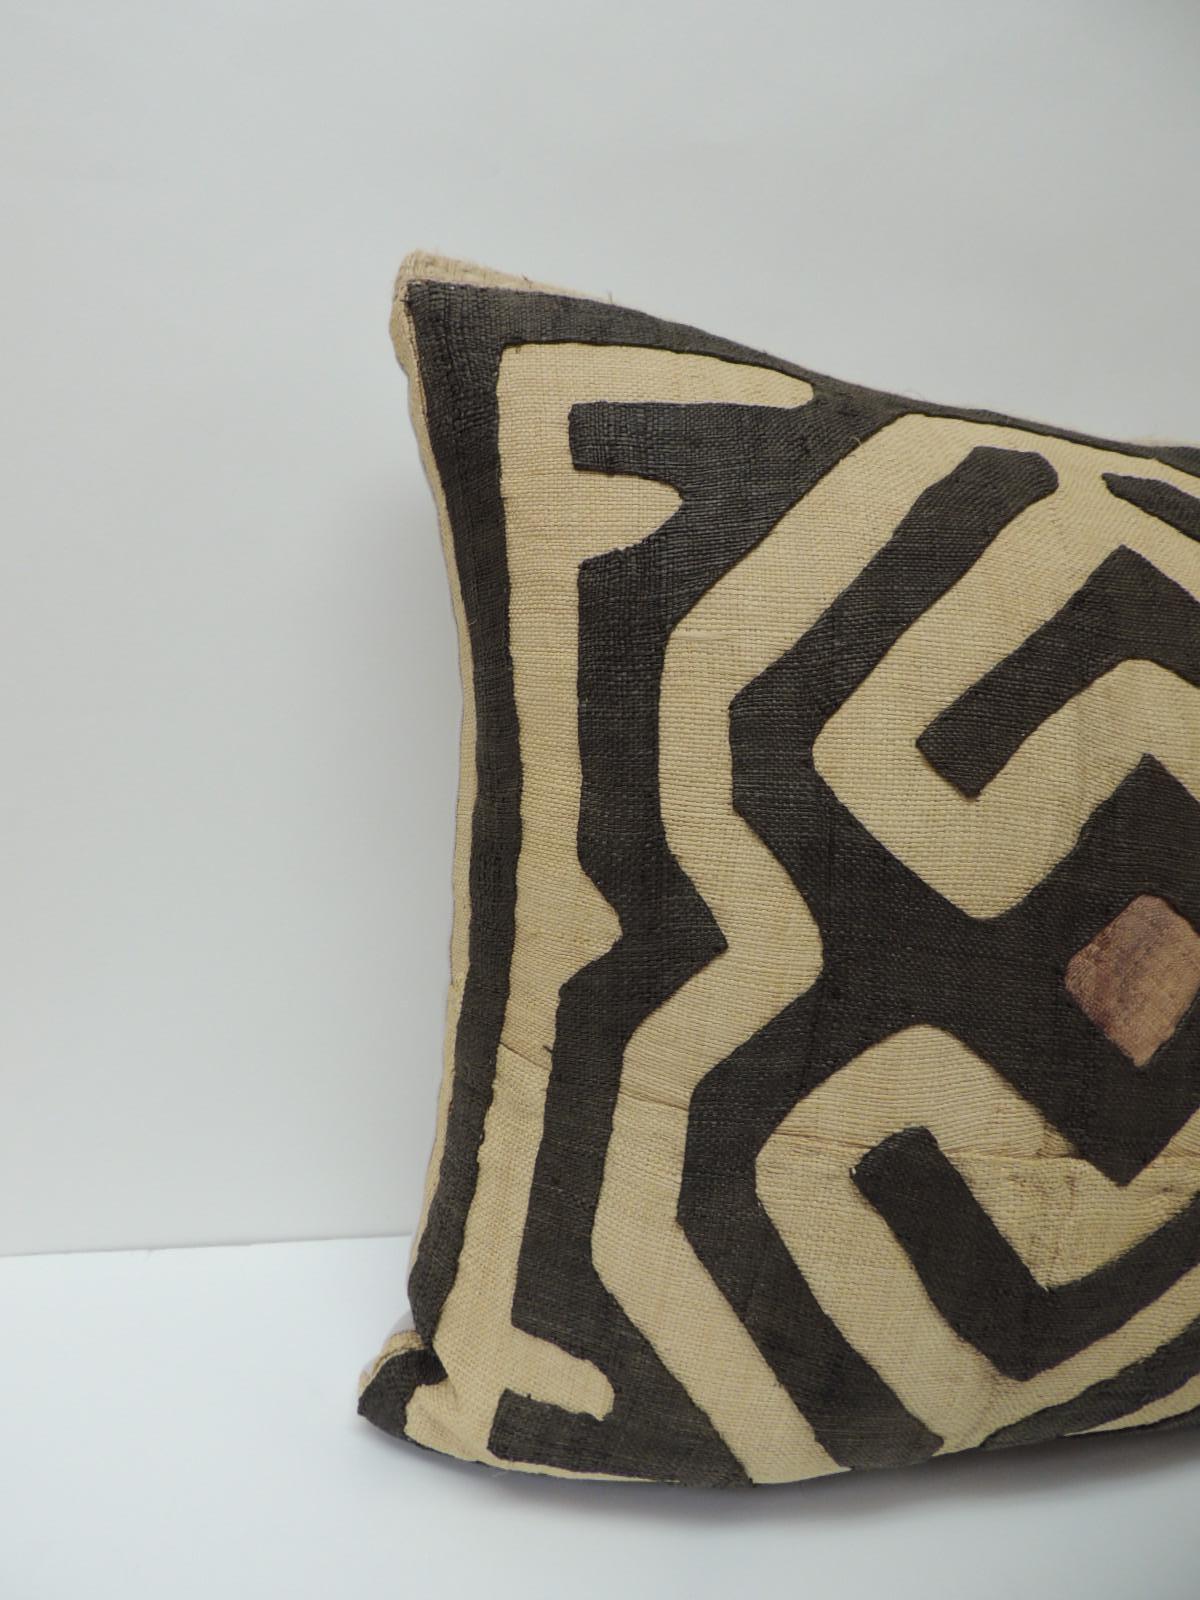 Tribal design textile on African Raffia textured finished pillows with basket weave jute trim details. Handcrafted and designed in the USA.
Custom made pillow insert.
Handstitched (no zipper.) Brown center medallion and stone grey linen backing,